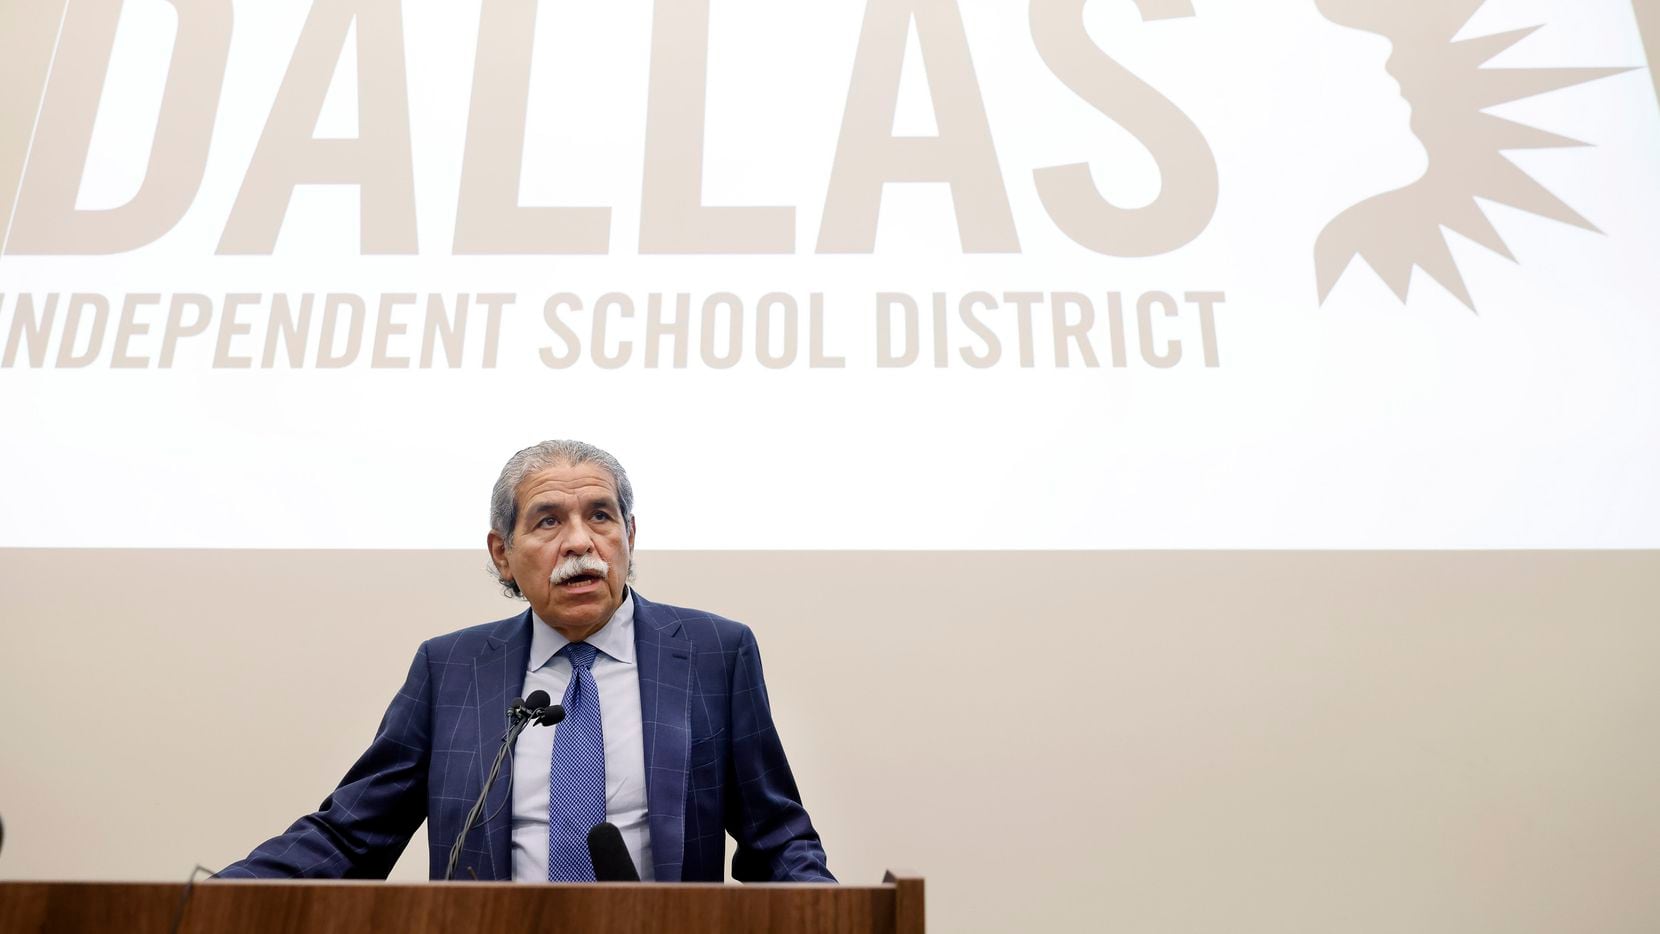 A move to run for elected office would mean an early resignation for Dallas ISD...